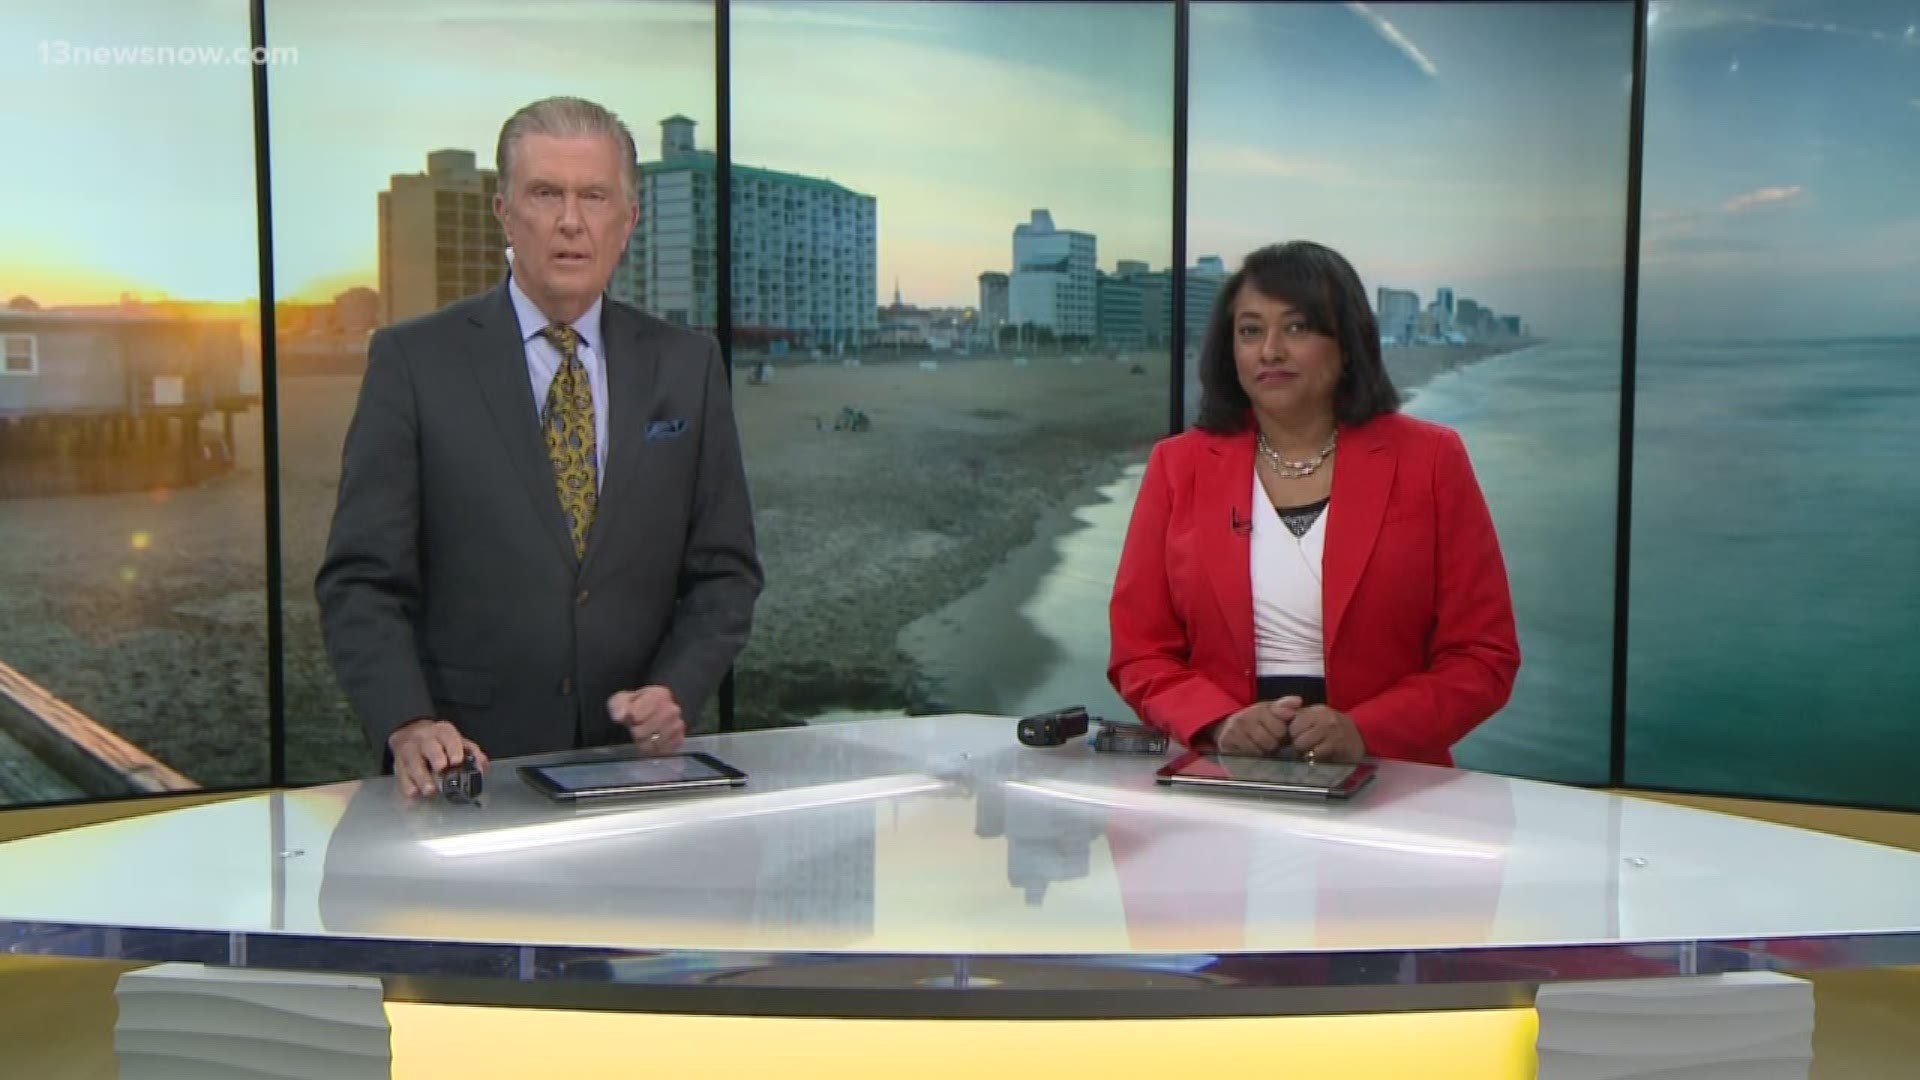 13News Now top headlines at 6 p.m. with David Alan and Janet Roach for December 6.